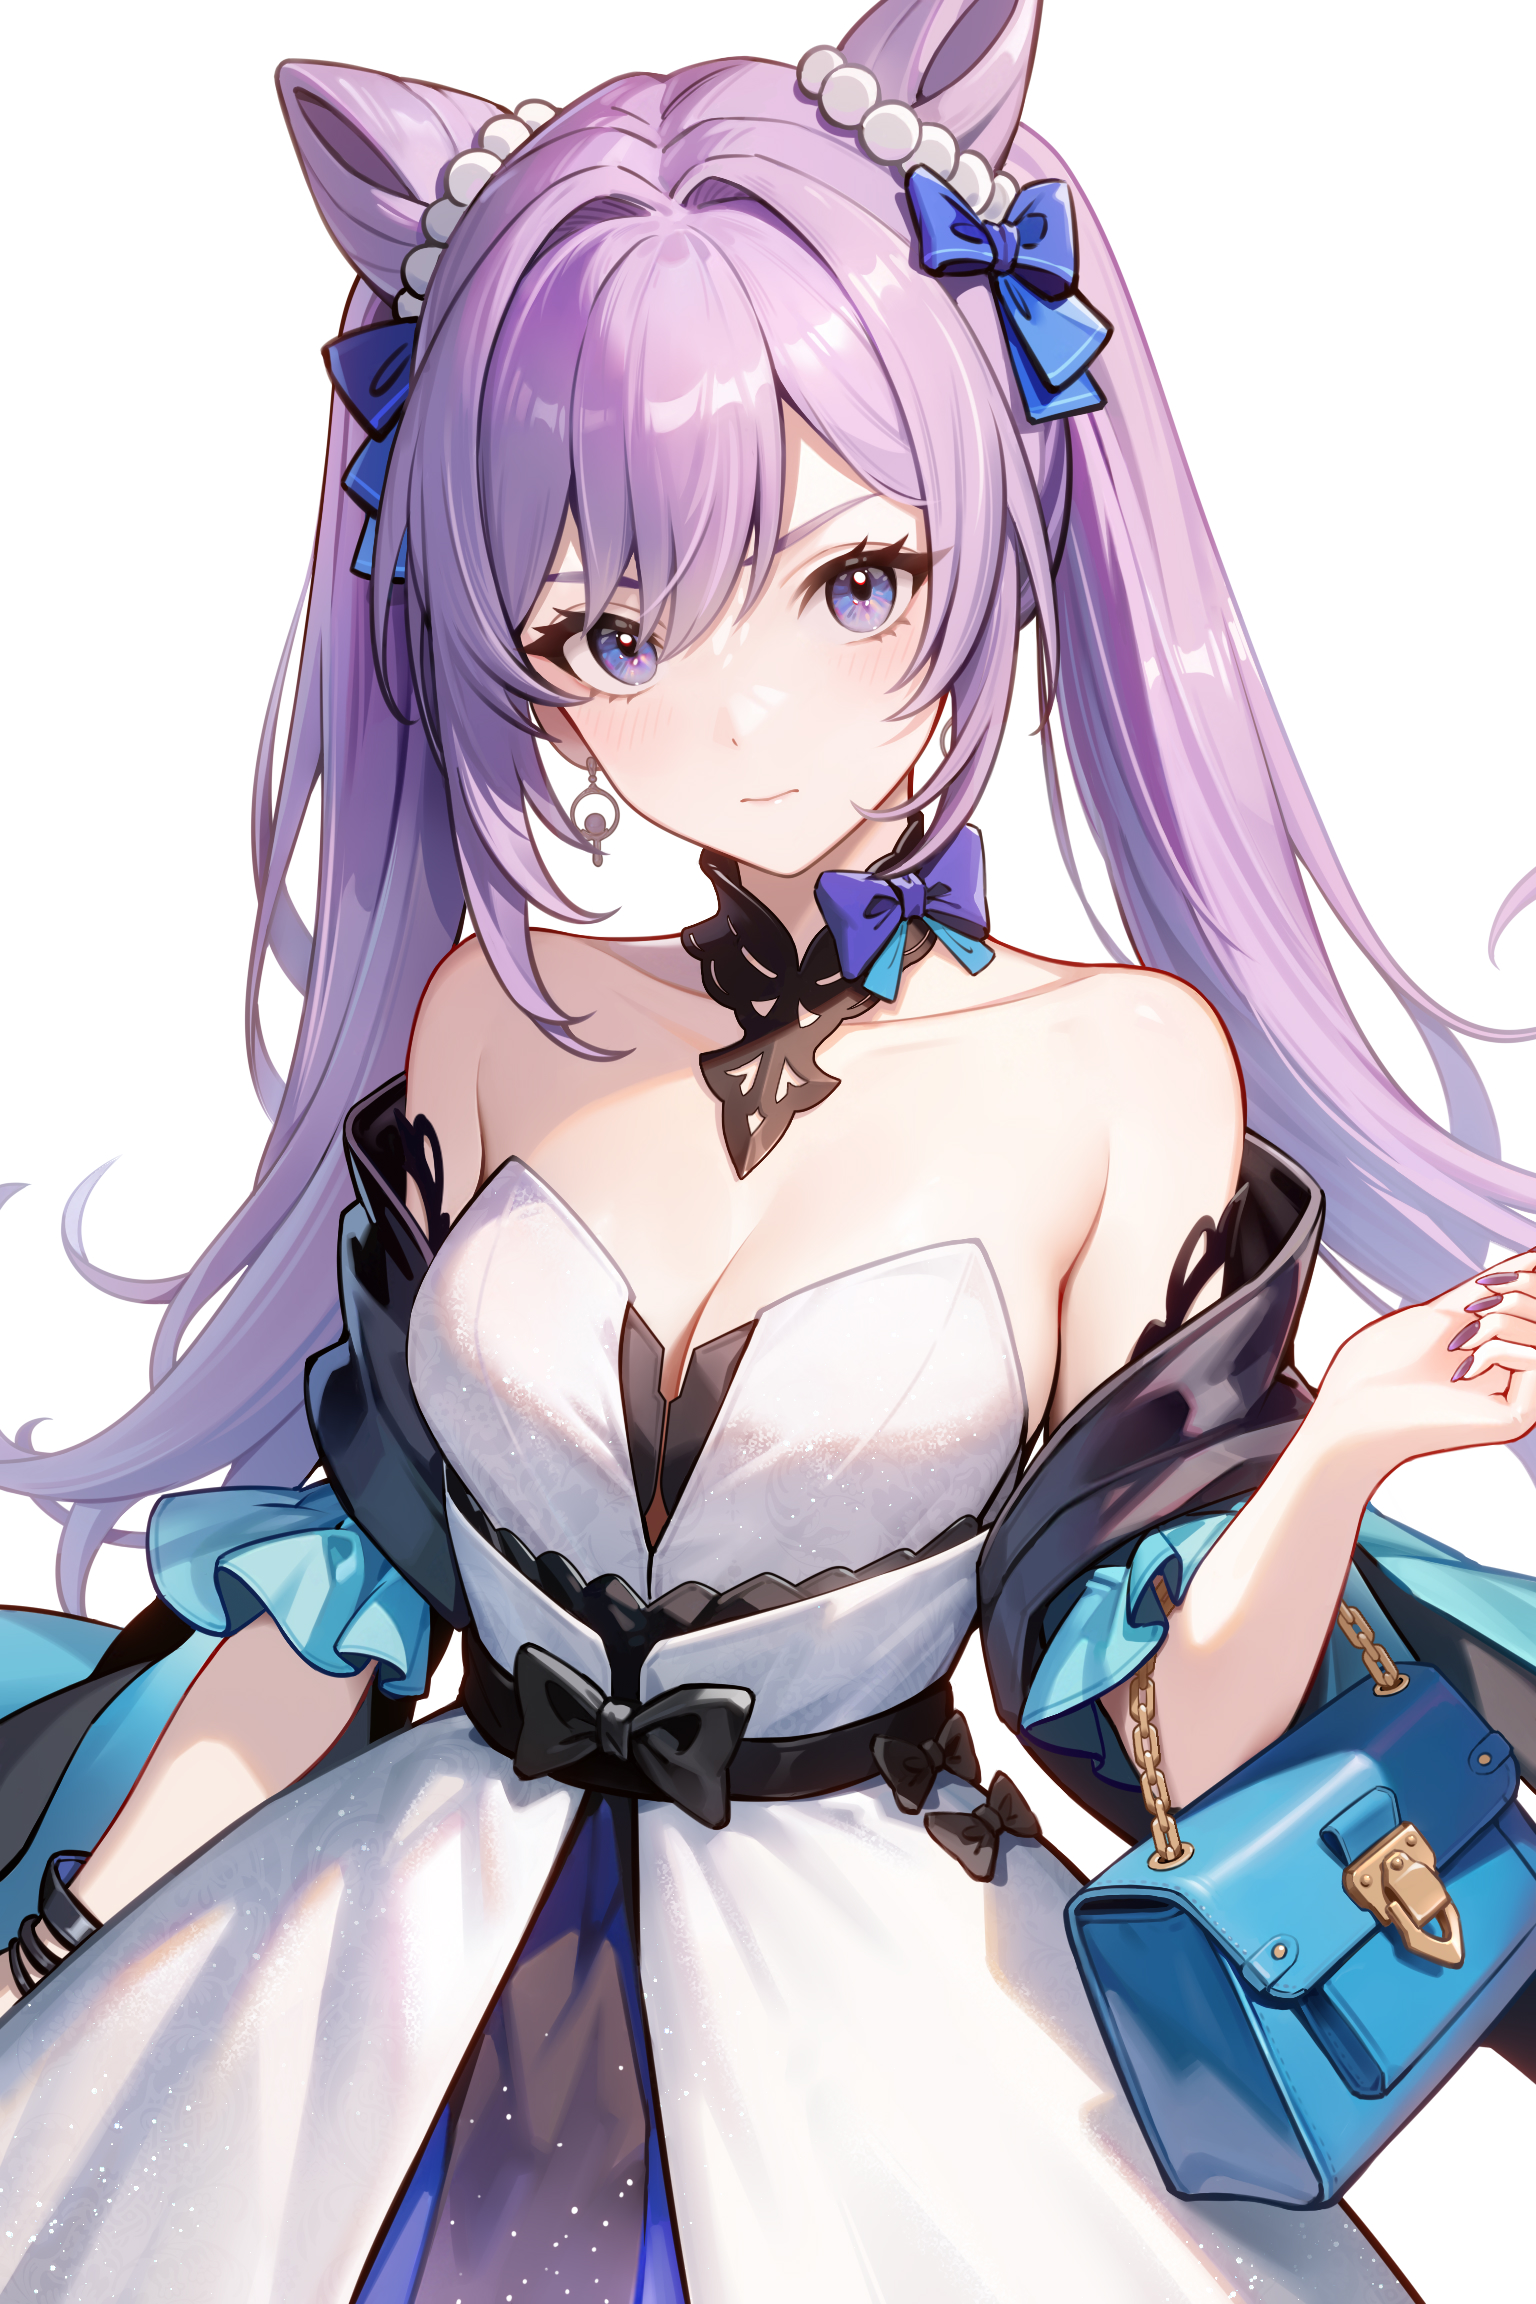 Anime 1536x2304 Genshin Impact artwork Keqing (Genshin Impact) anime anime girls purple hair purple eyes ponytail cat ears cat girl bare shoulders big boobs cleavage earring handbags dress bow tie simple background white background twintails portrait display long hair looking at viewer purse